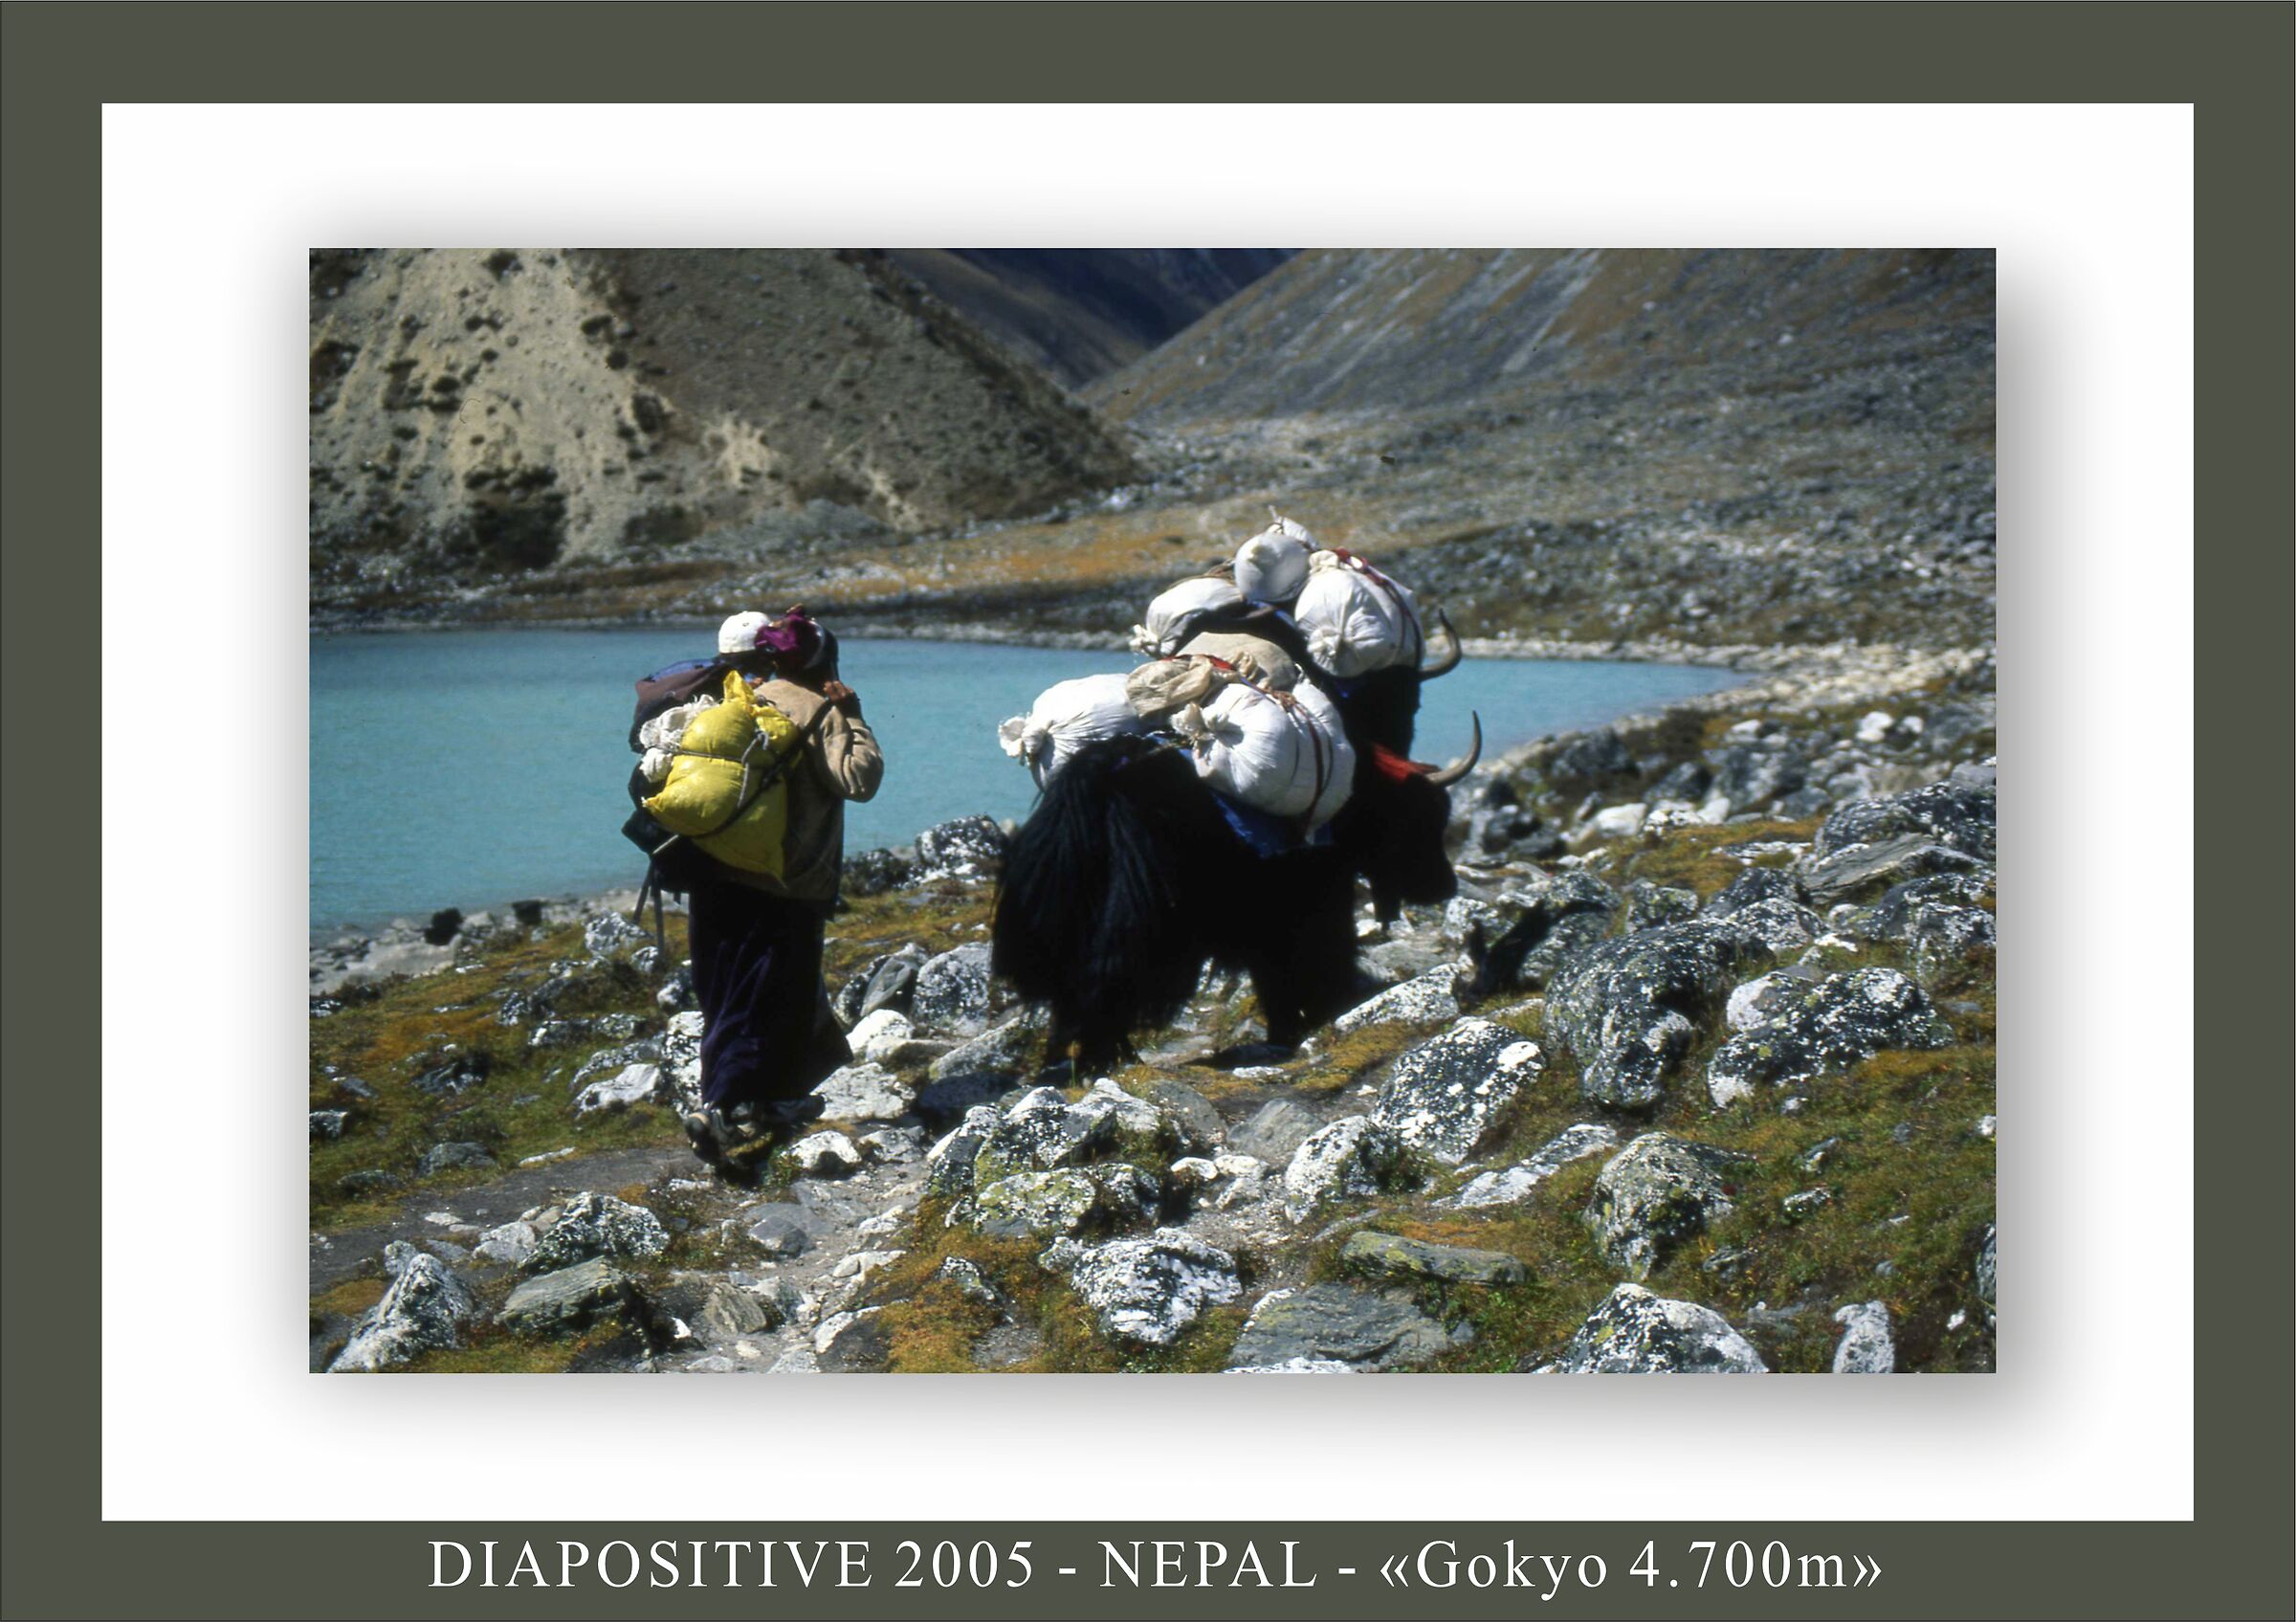 going up to the lakes of Gokyo...